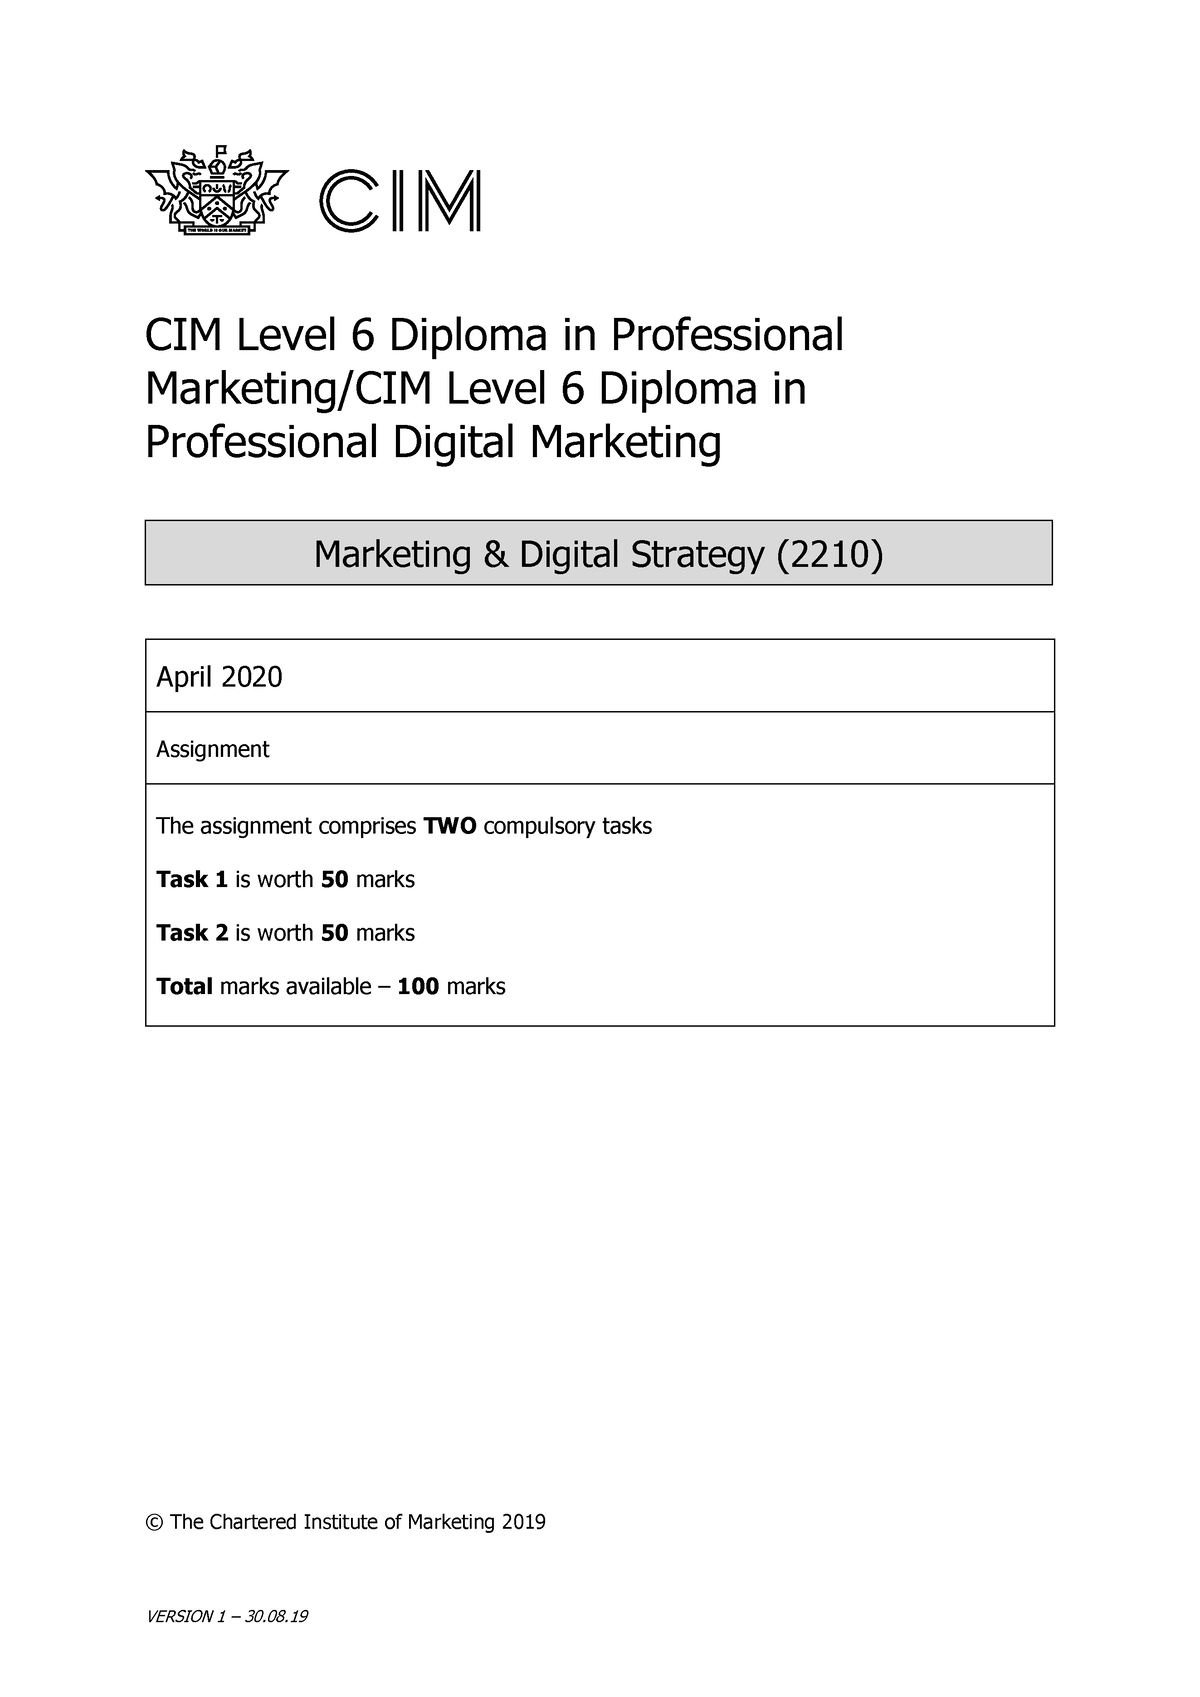 cim marketing and digital strategy assignment example